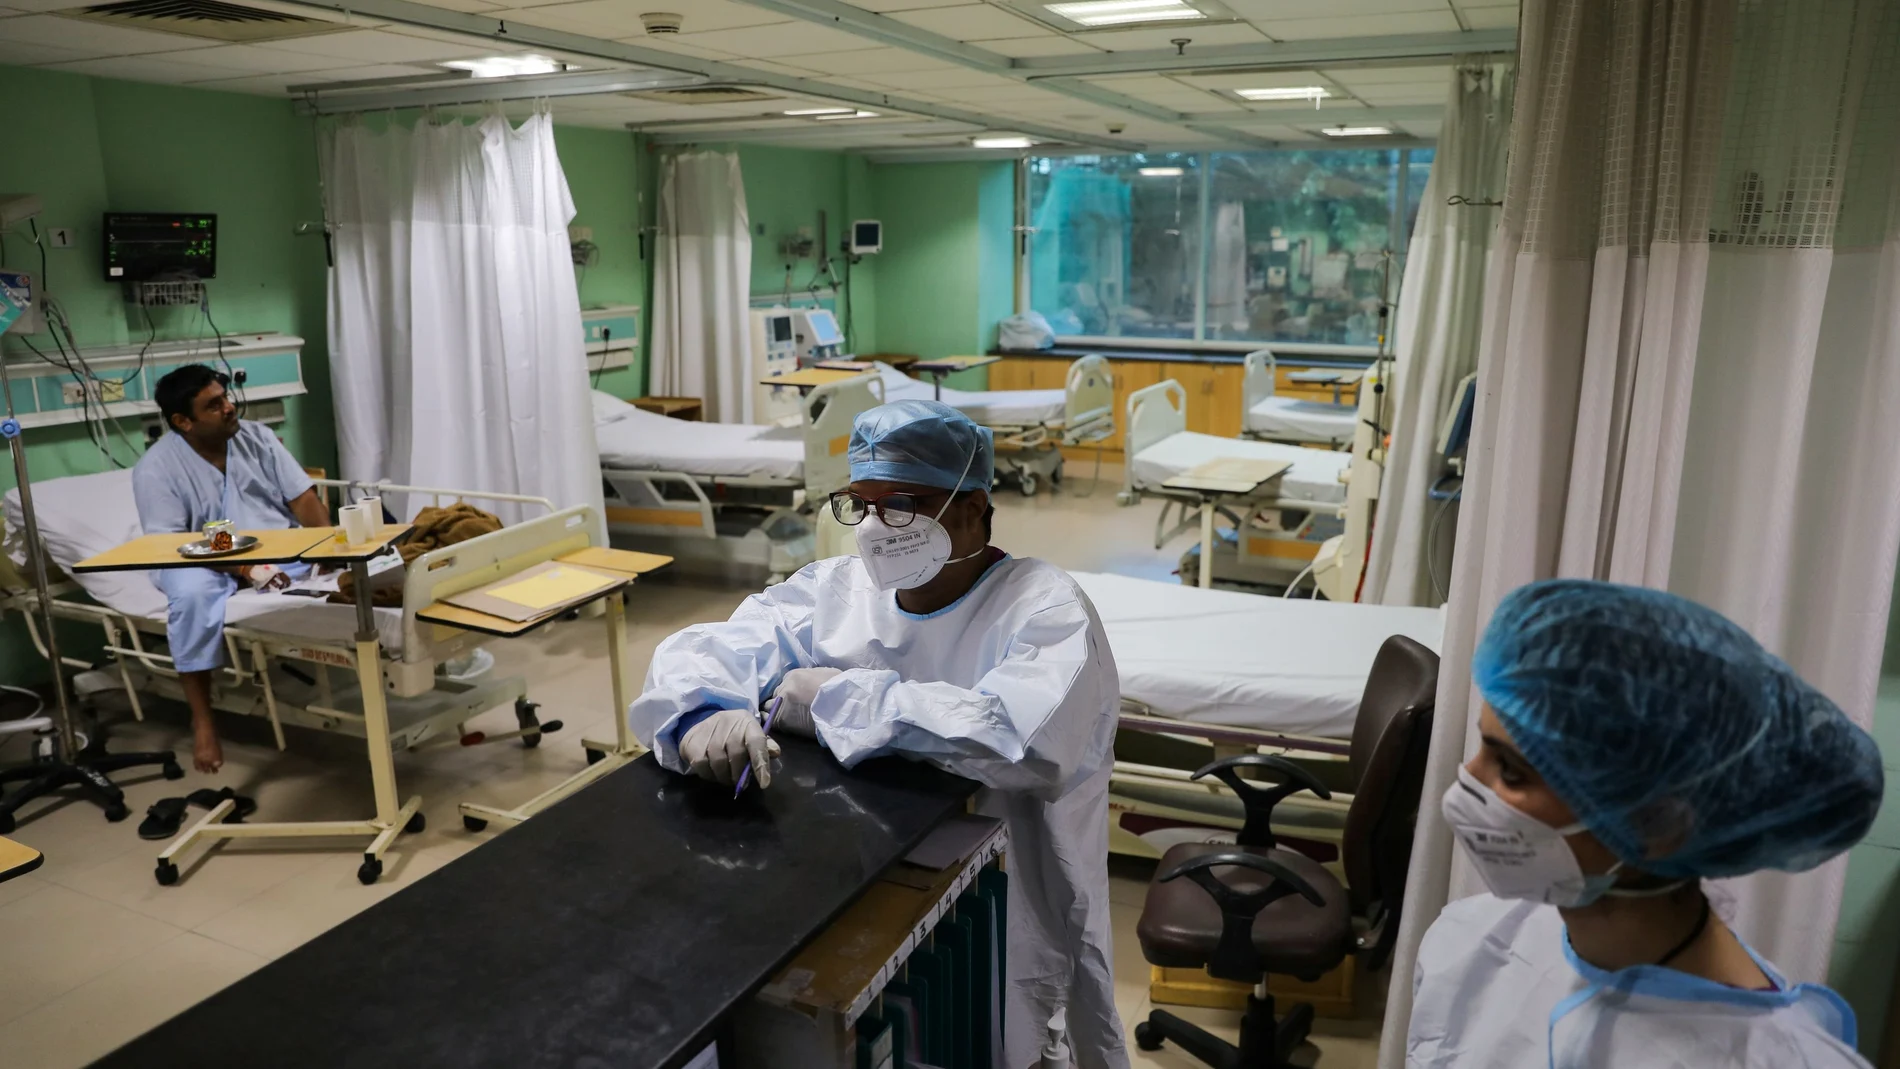 Healthcare workers are seen inside a ward for the coronavirus disease (COVID-19) patients at Sir Ganga Ram Hospital in New Delhi, September 3, 2021. Picture taken on September 3, 2021. REUTERS/Anushree Fadnavis